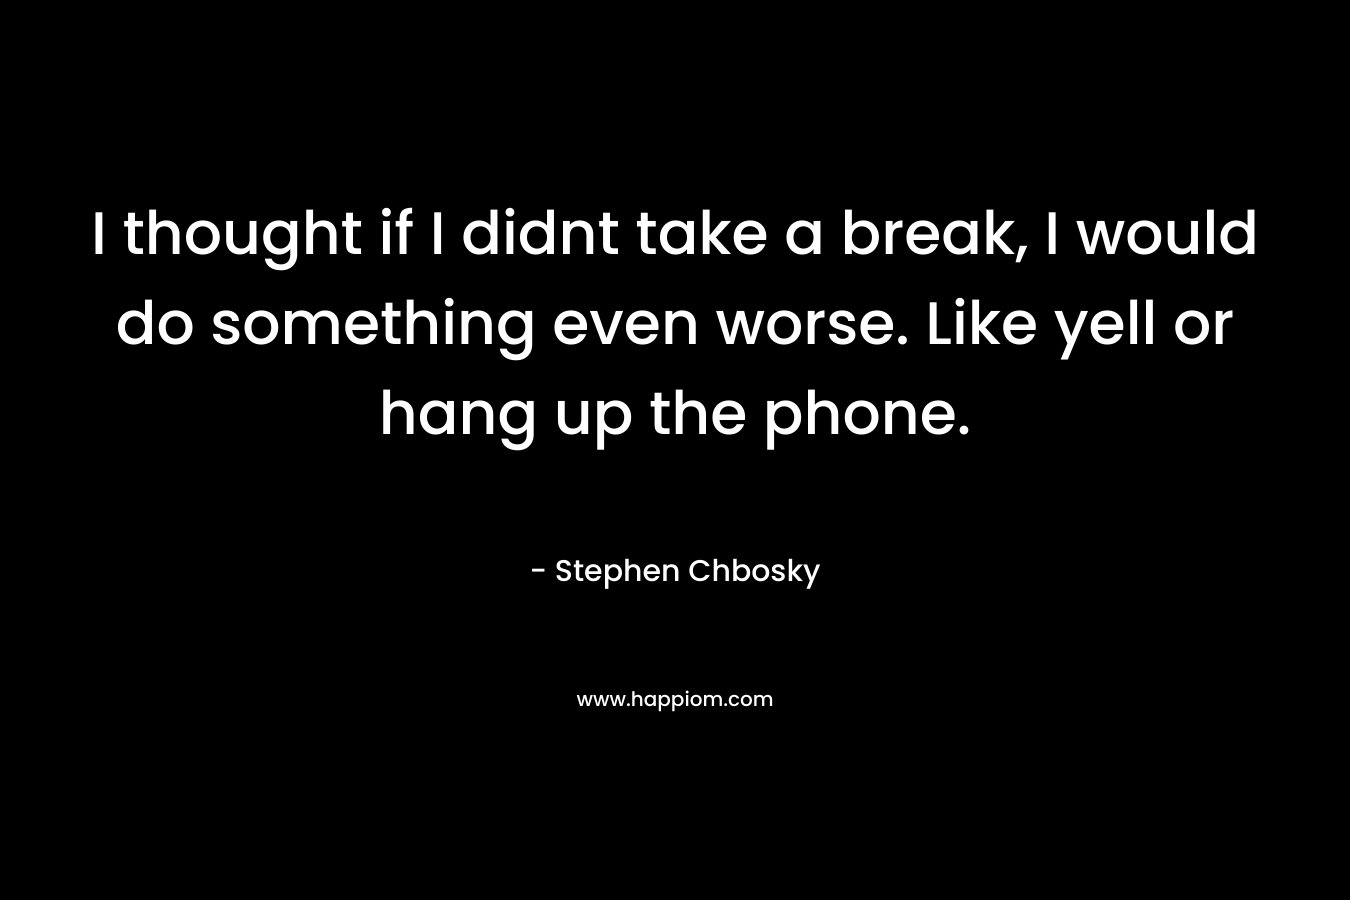 I thought if I didnt take a break, I would do something even worse. Like yell or hang up the phone. – Stephen Chbosky